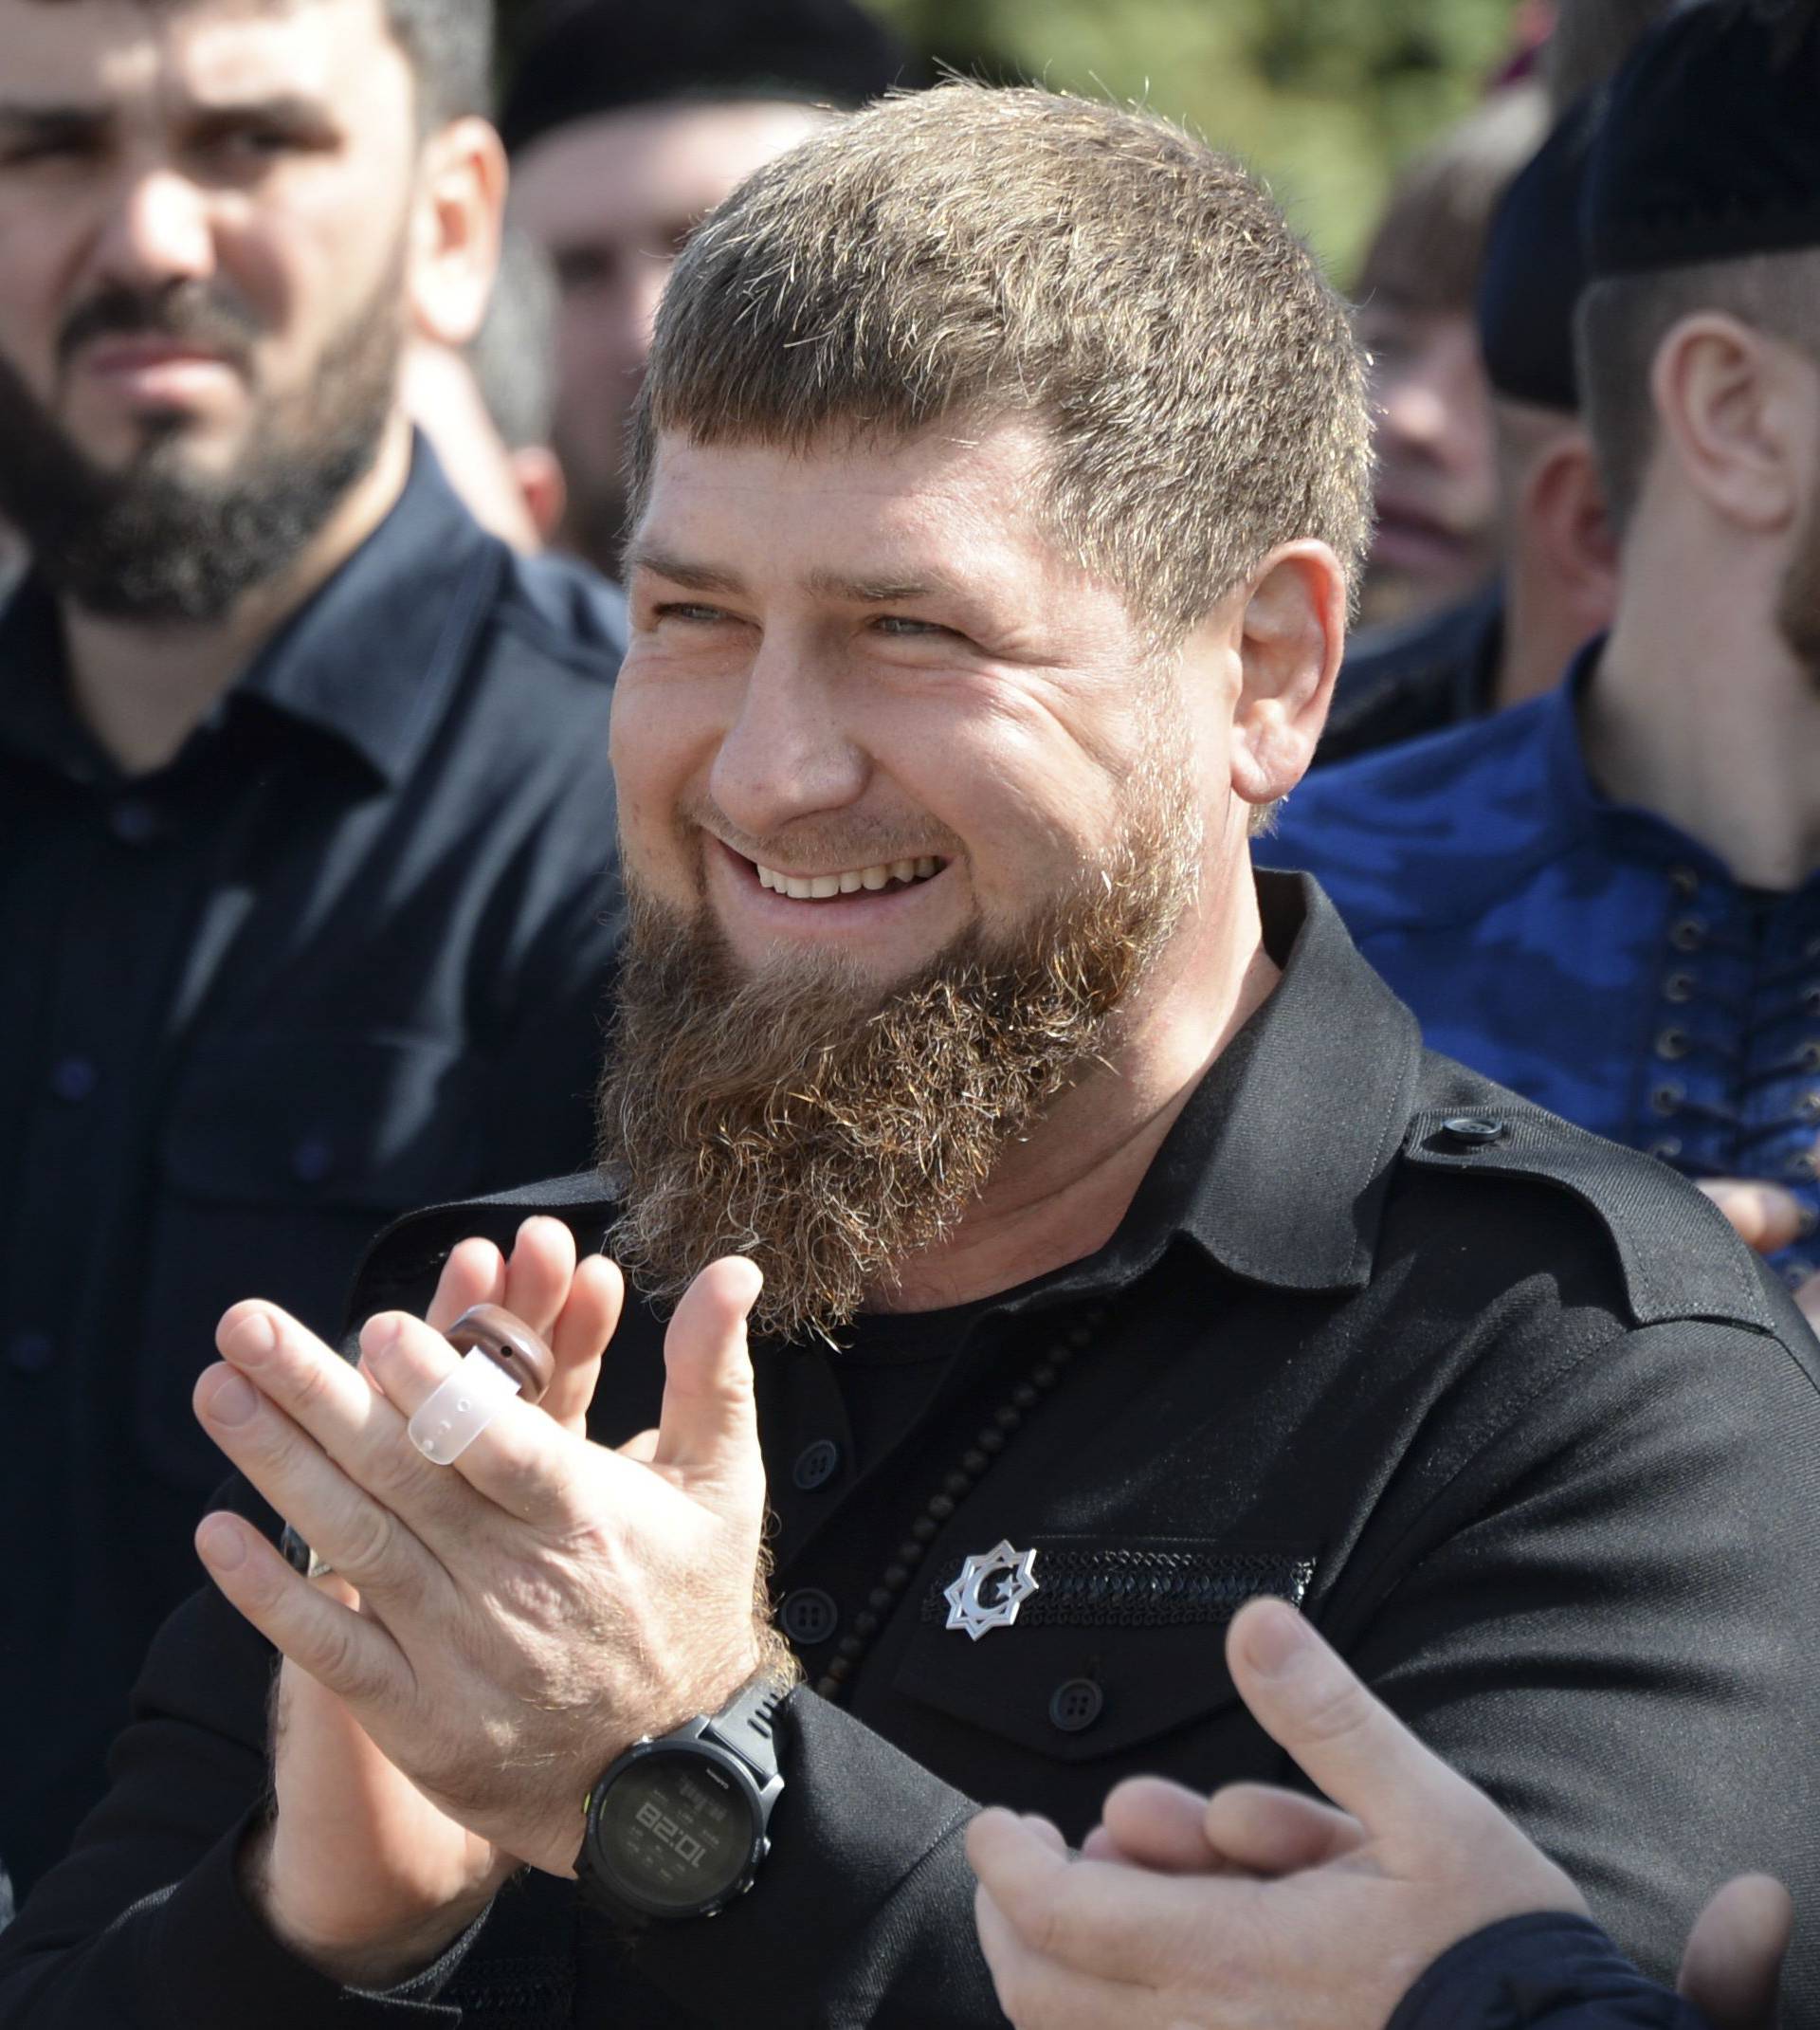 Head of the Chechen Republic Kadyrov applauds after visiting a polling station during the presidential election in Tsentoroy